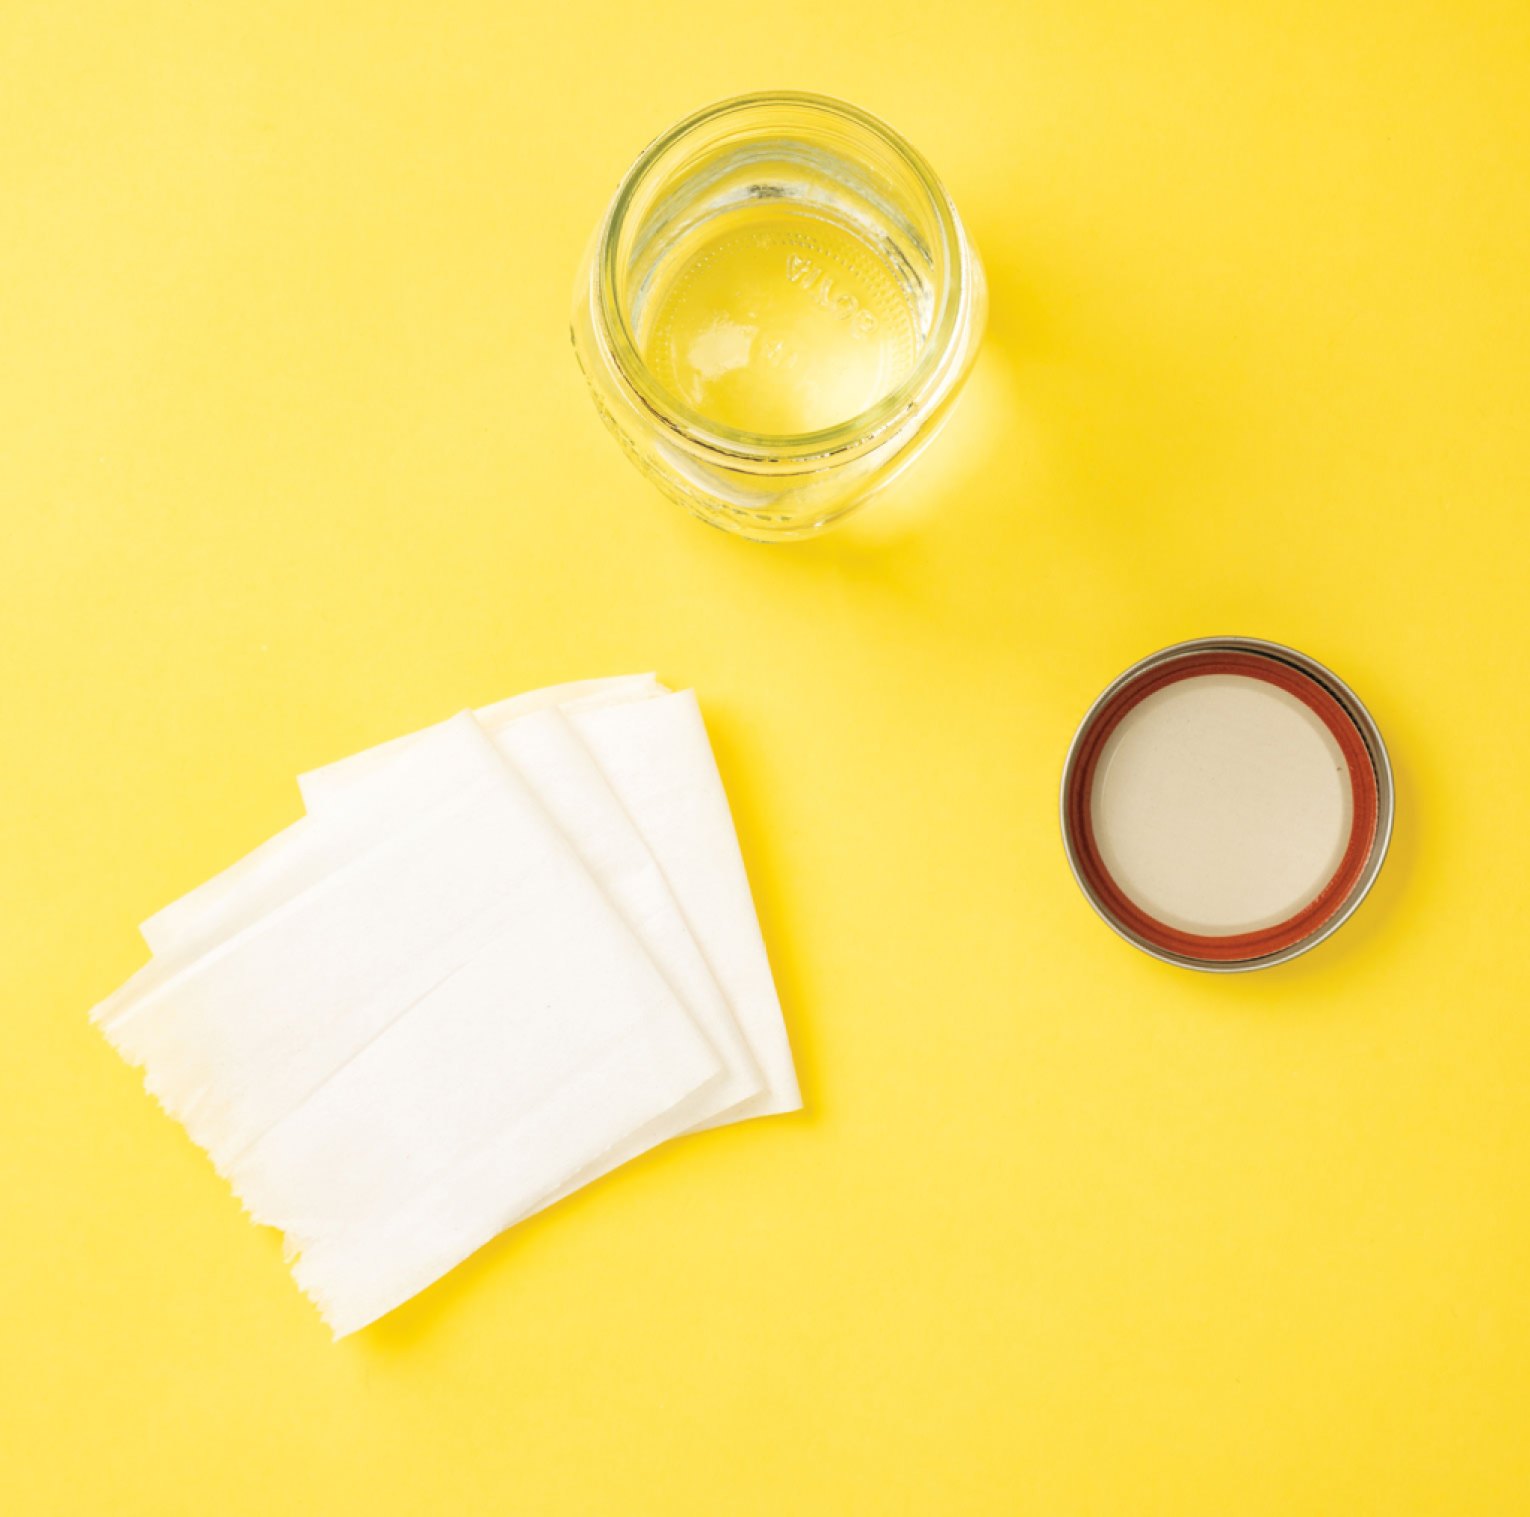 Photo of toilet paper and jar filled with water on a yellow background.